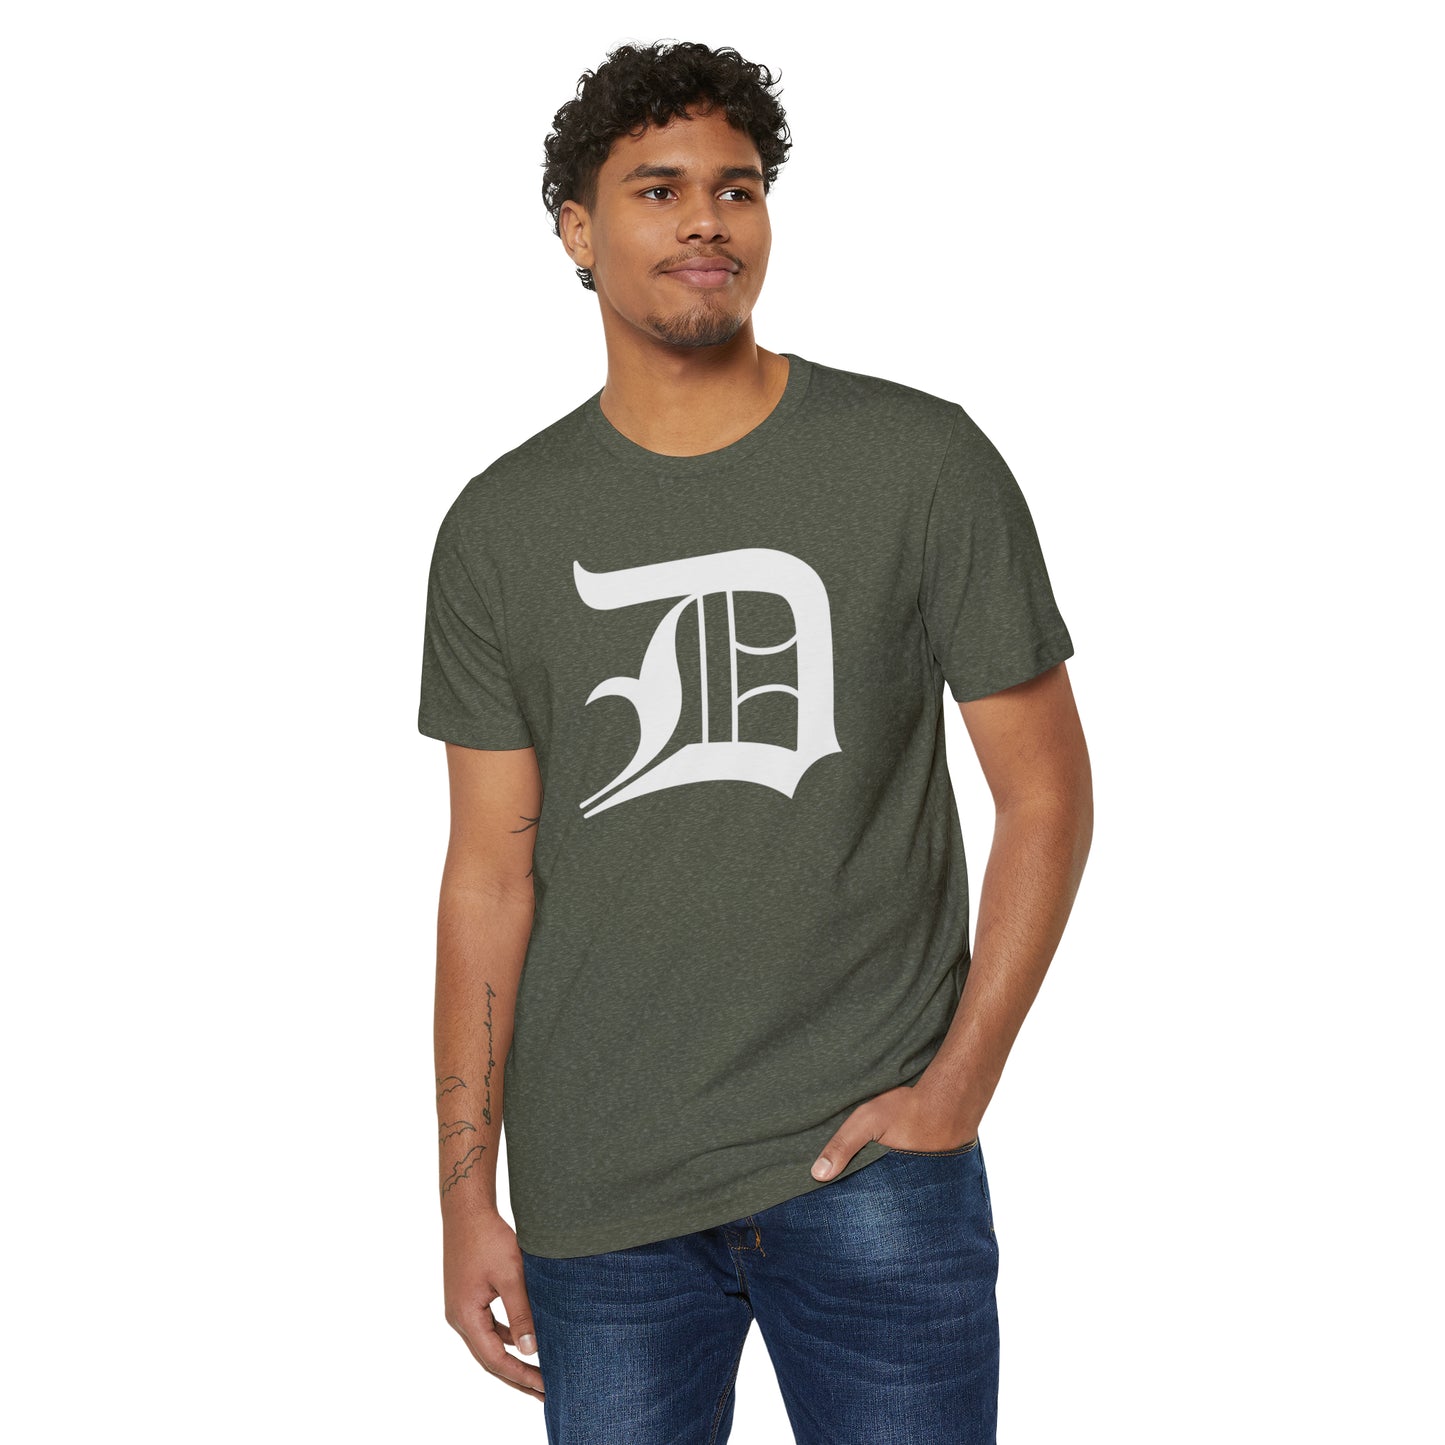 Detroit 'Old English D' T-Shirt | Unisex Recycled Organic